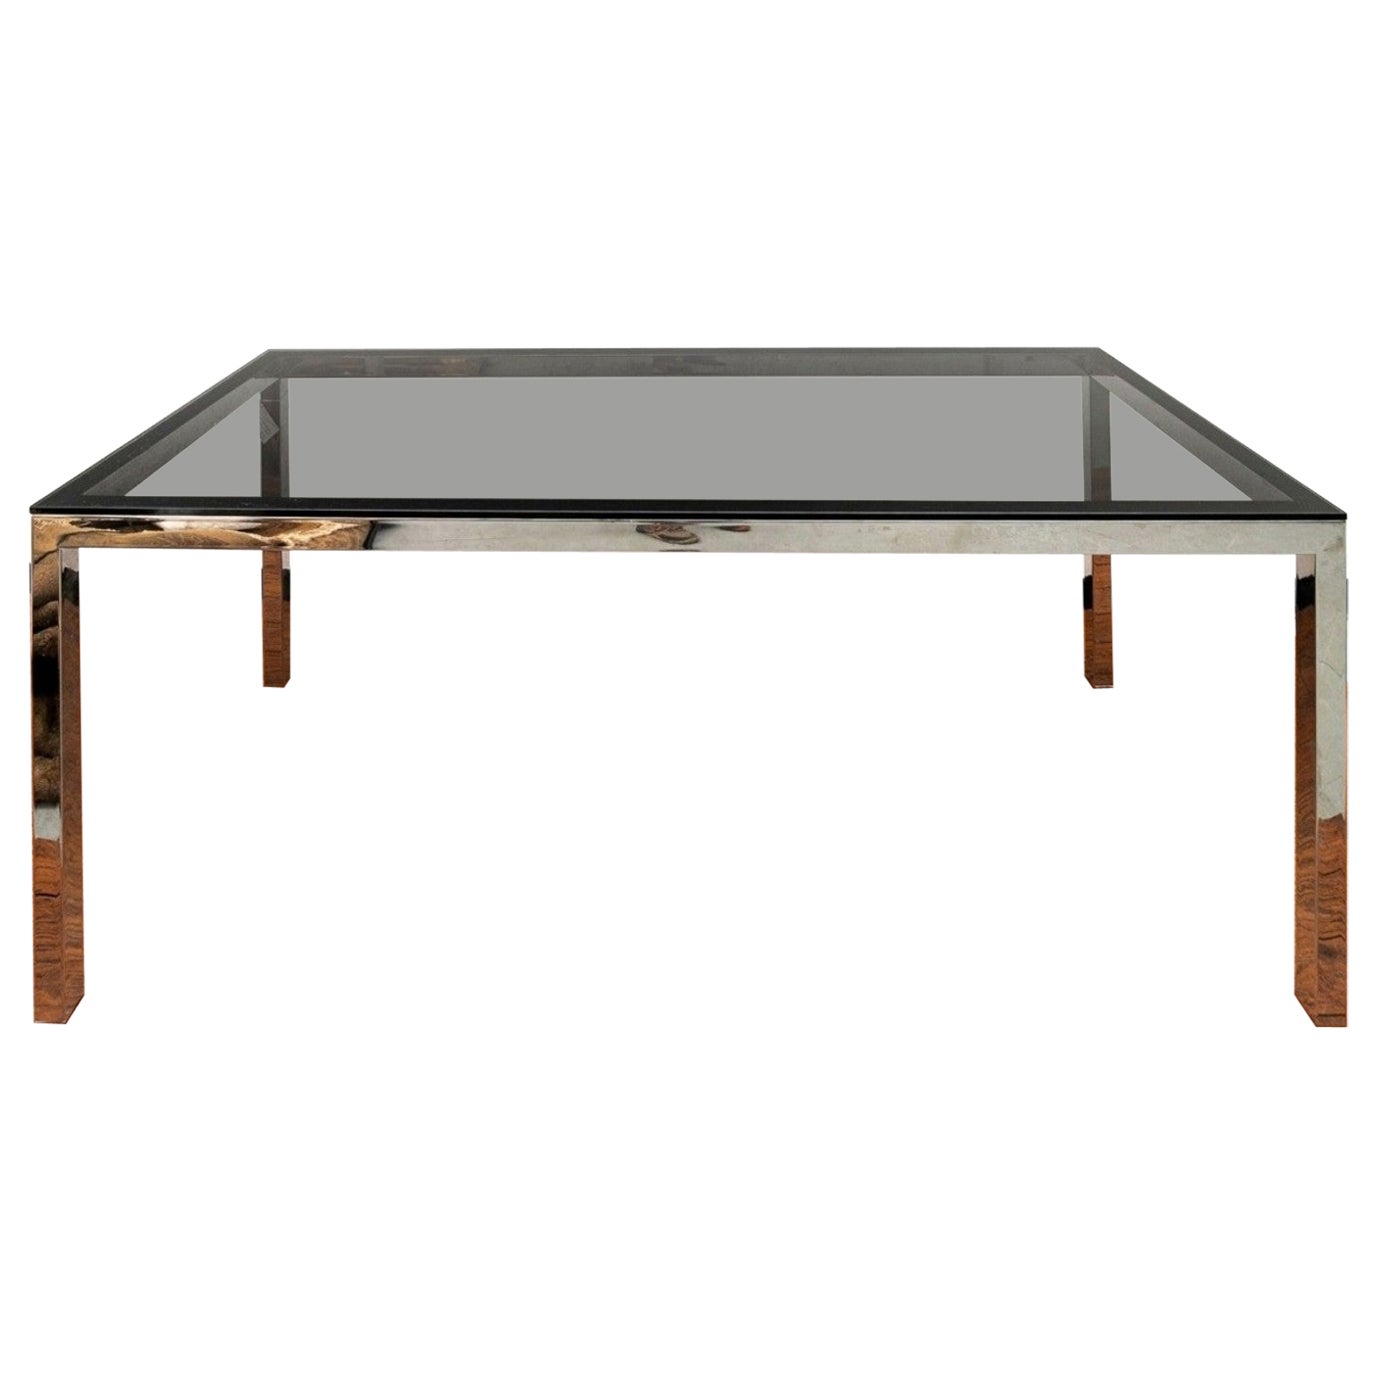 Brueton American Modernist Polished Stainless Steel Smoked Glass Dining Table  For Sale